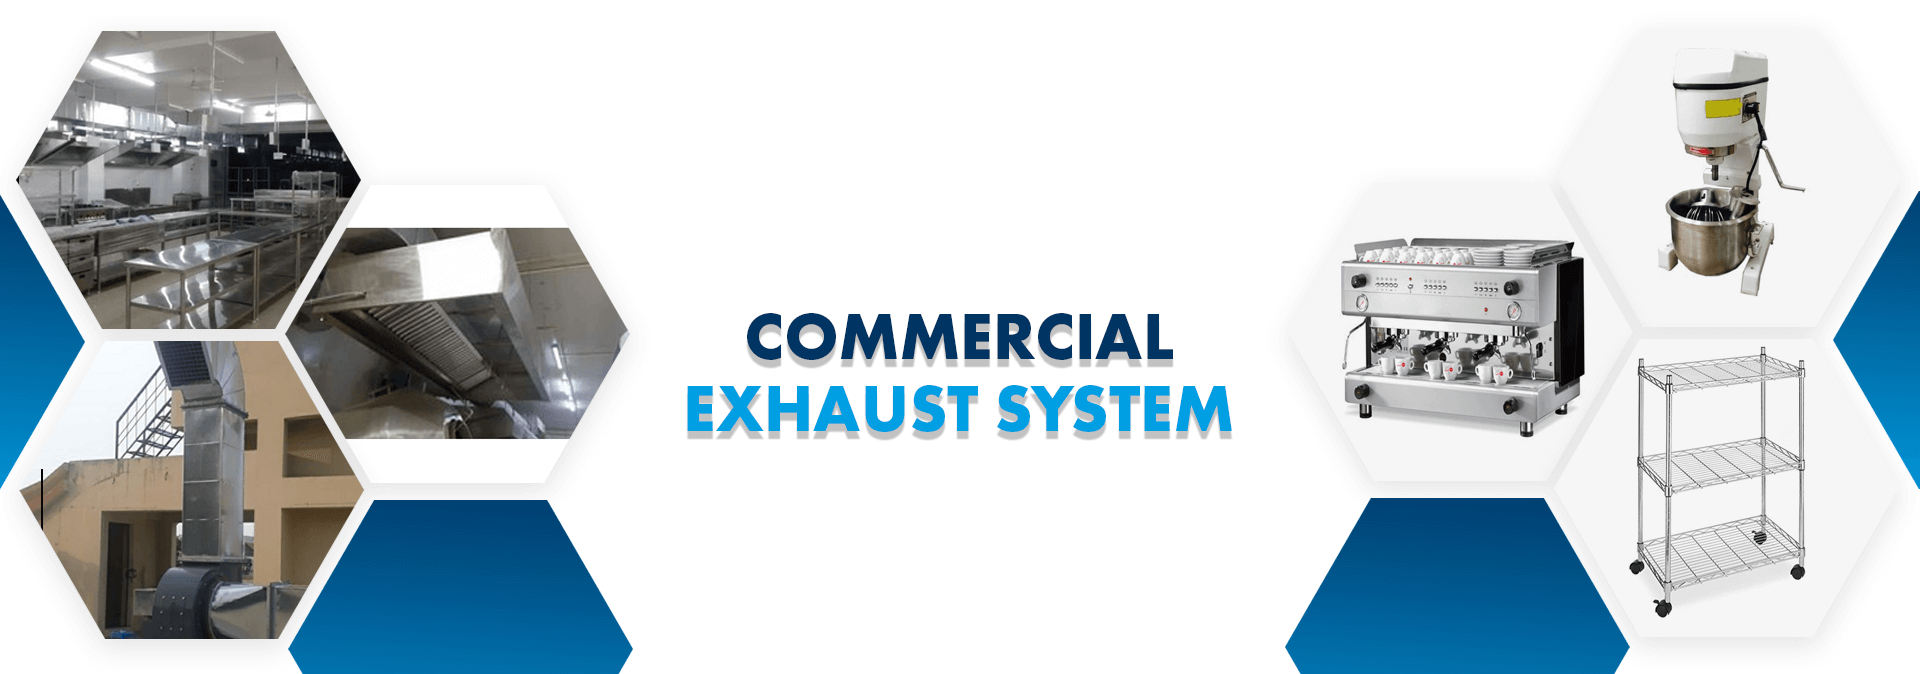 Commercial Exhaust Systems Equipments manufacturers in Bangalore